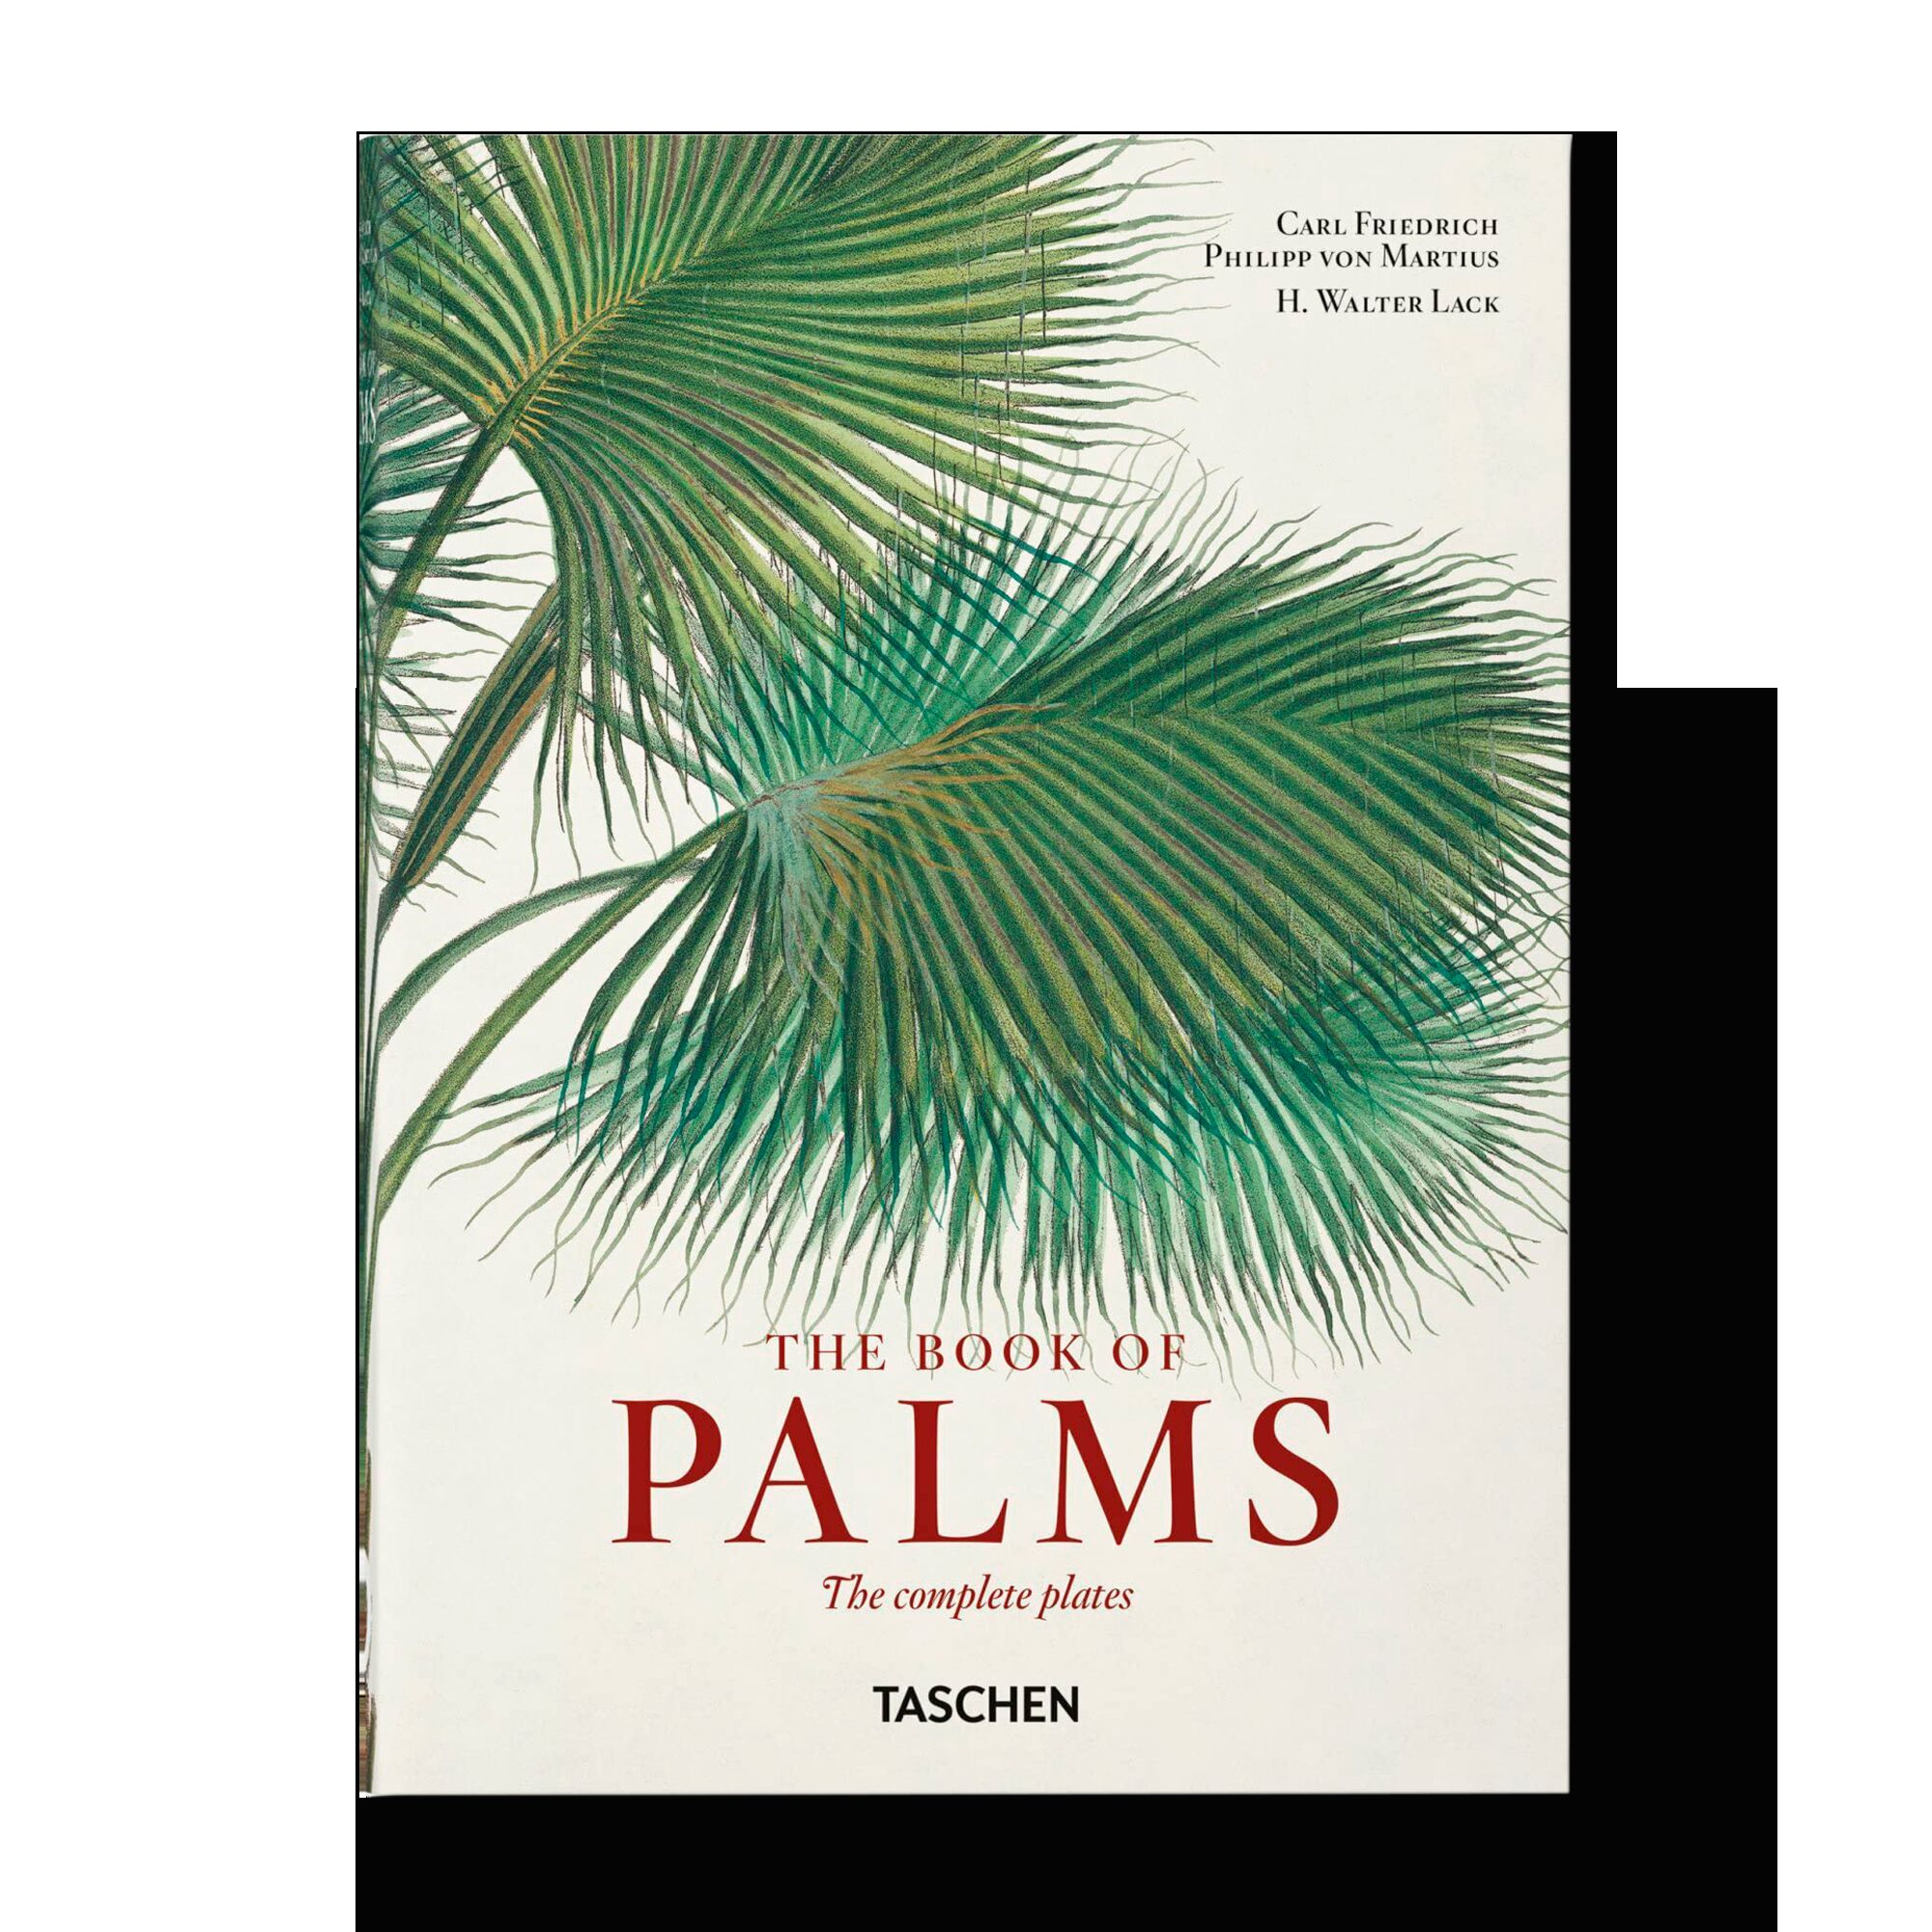 The Book of Palms. The complete plates